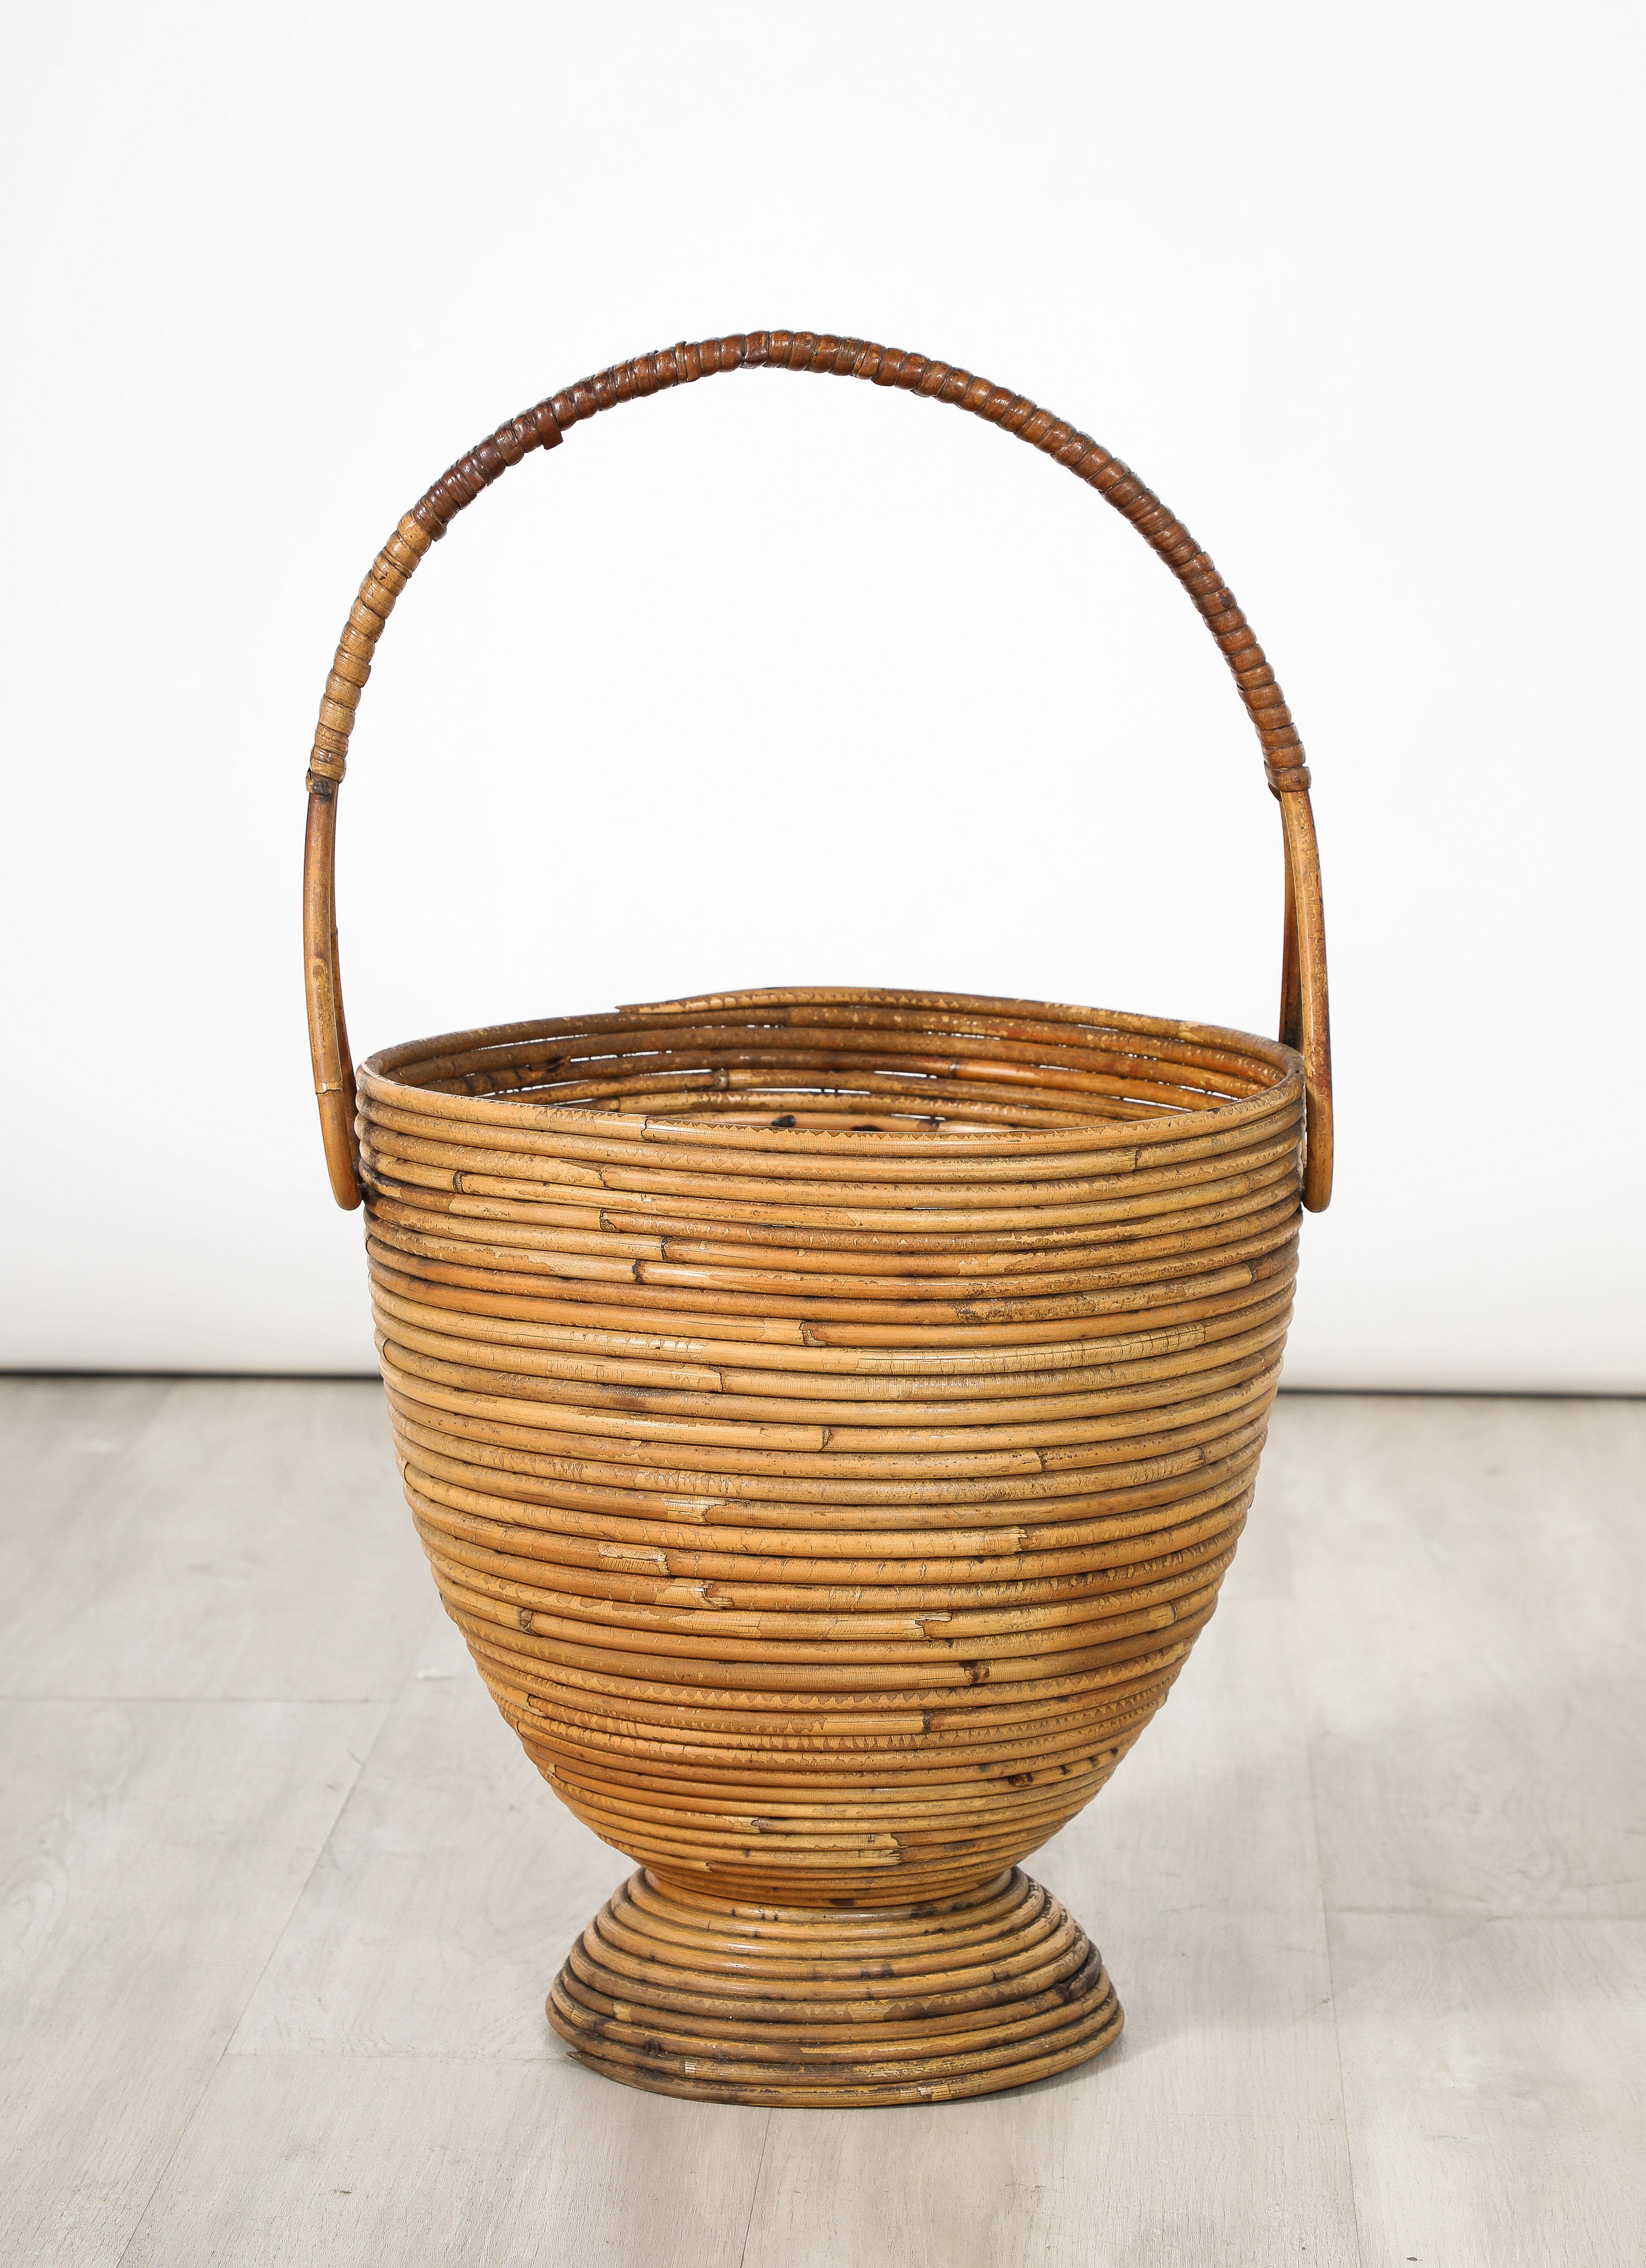 A charming Italian 1950's bamboo and wood hand-crafted basket with handle. 
Italy, circa 1950
Size: 23